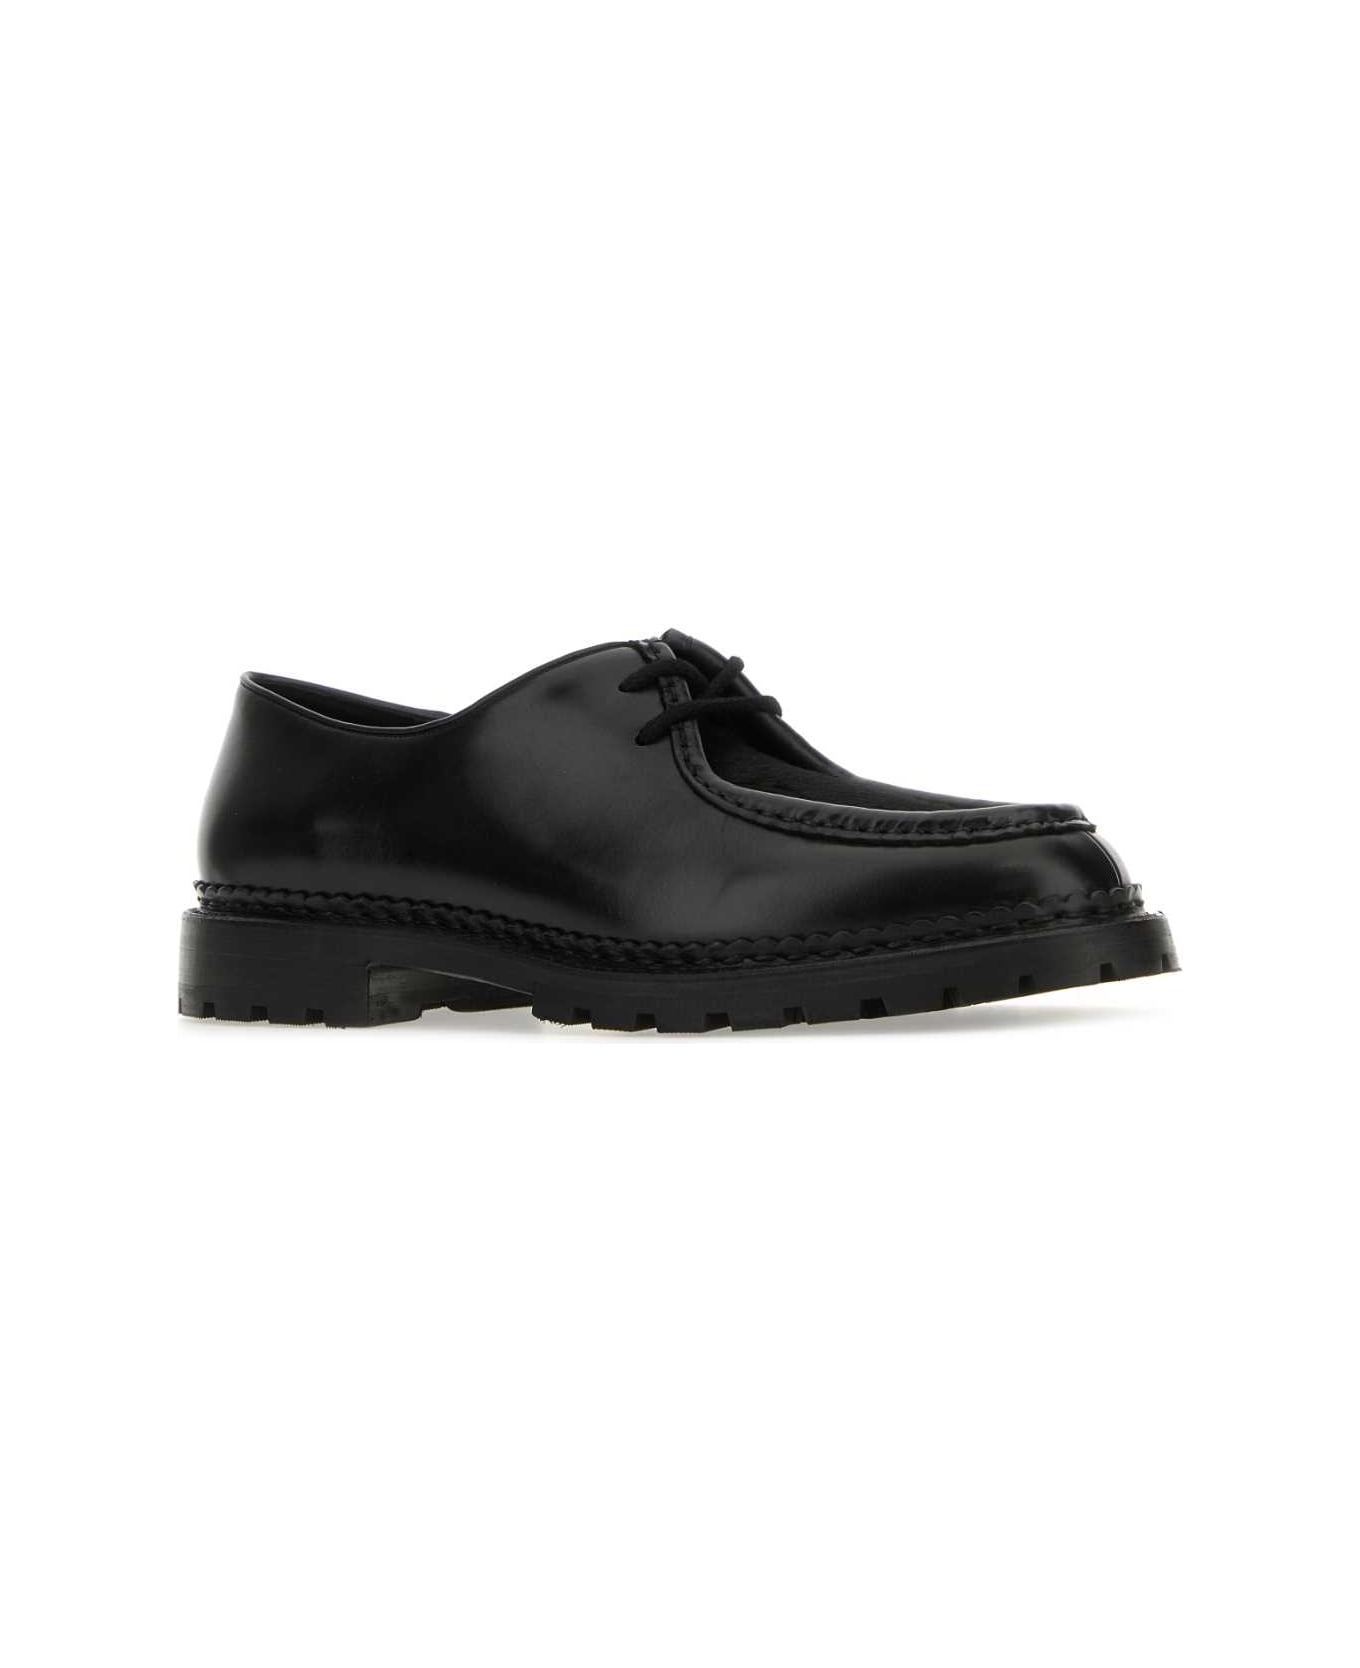 Saint Laurent Leather And Calf Hair Lace-up Shoes - NERONERONERO